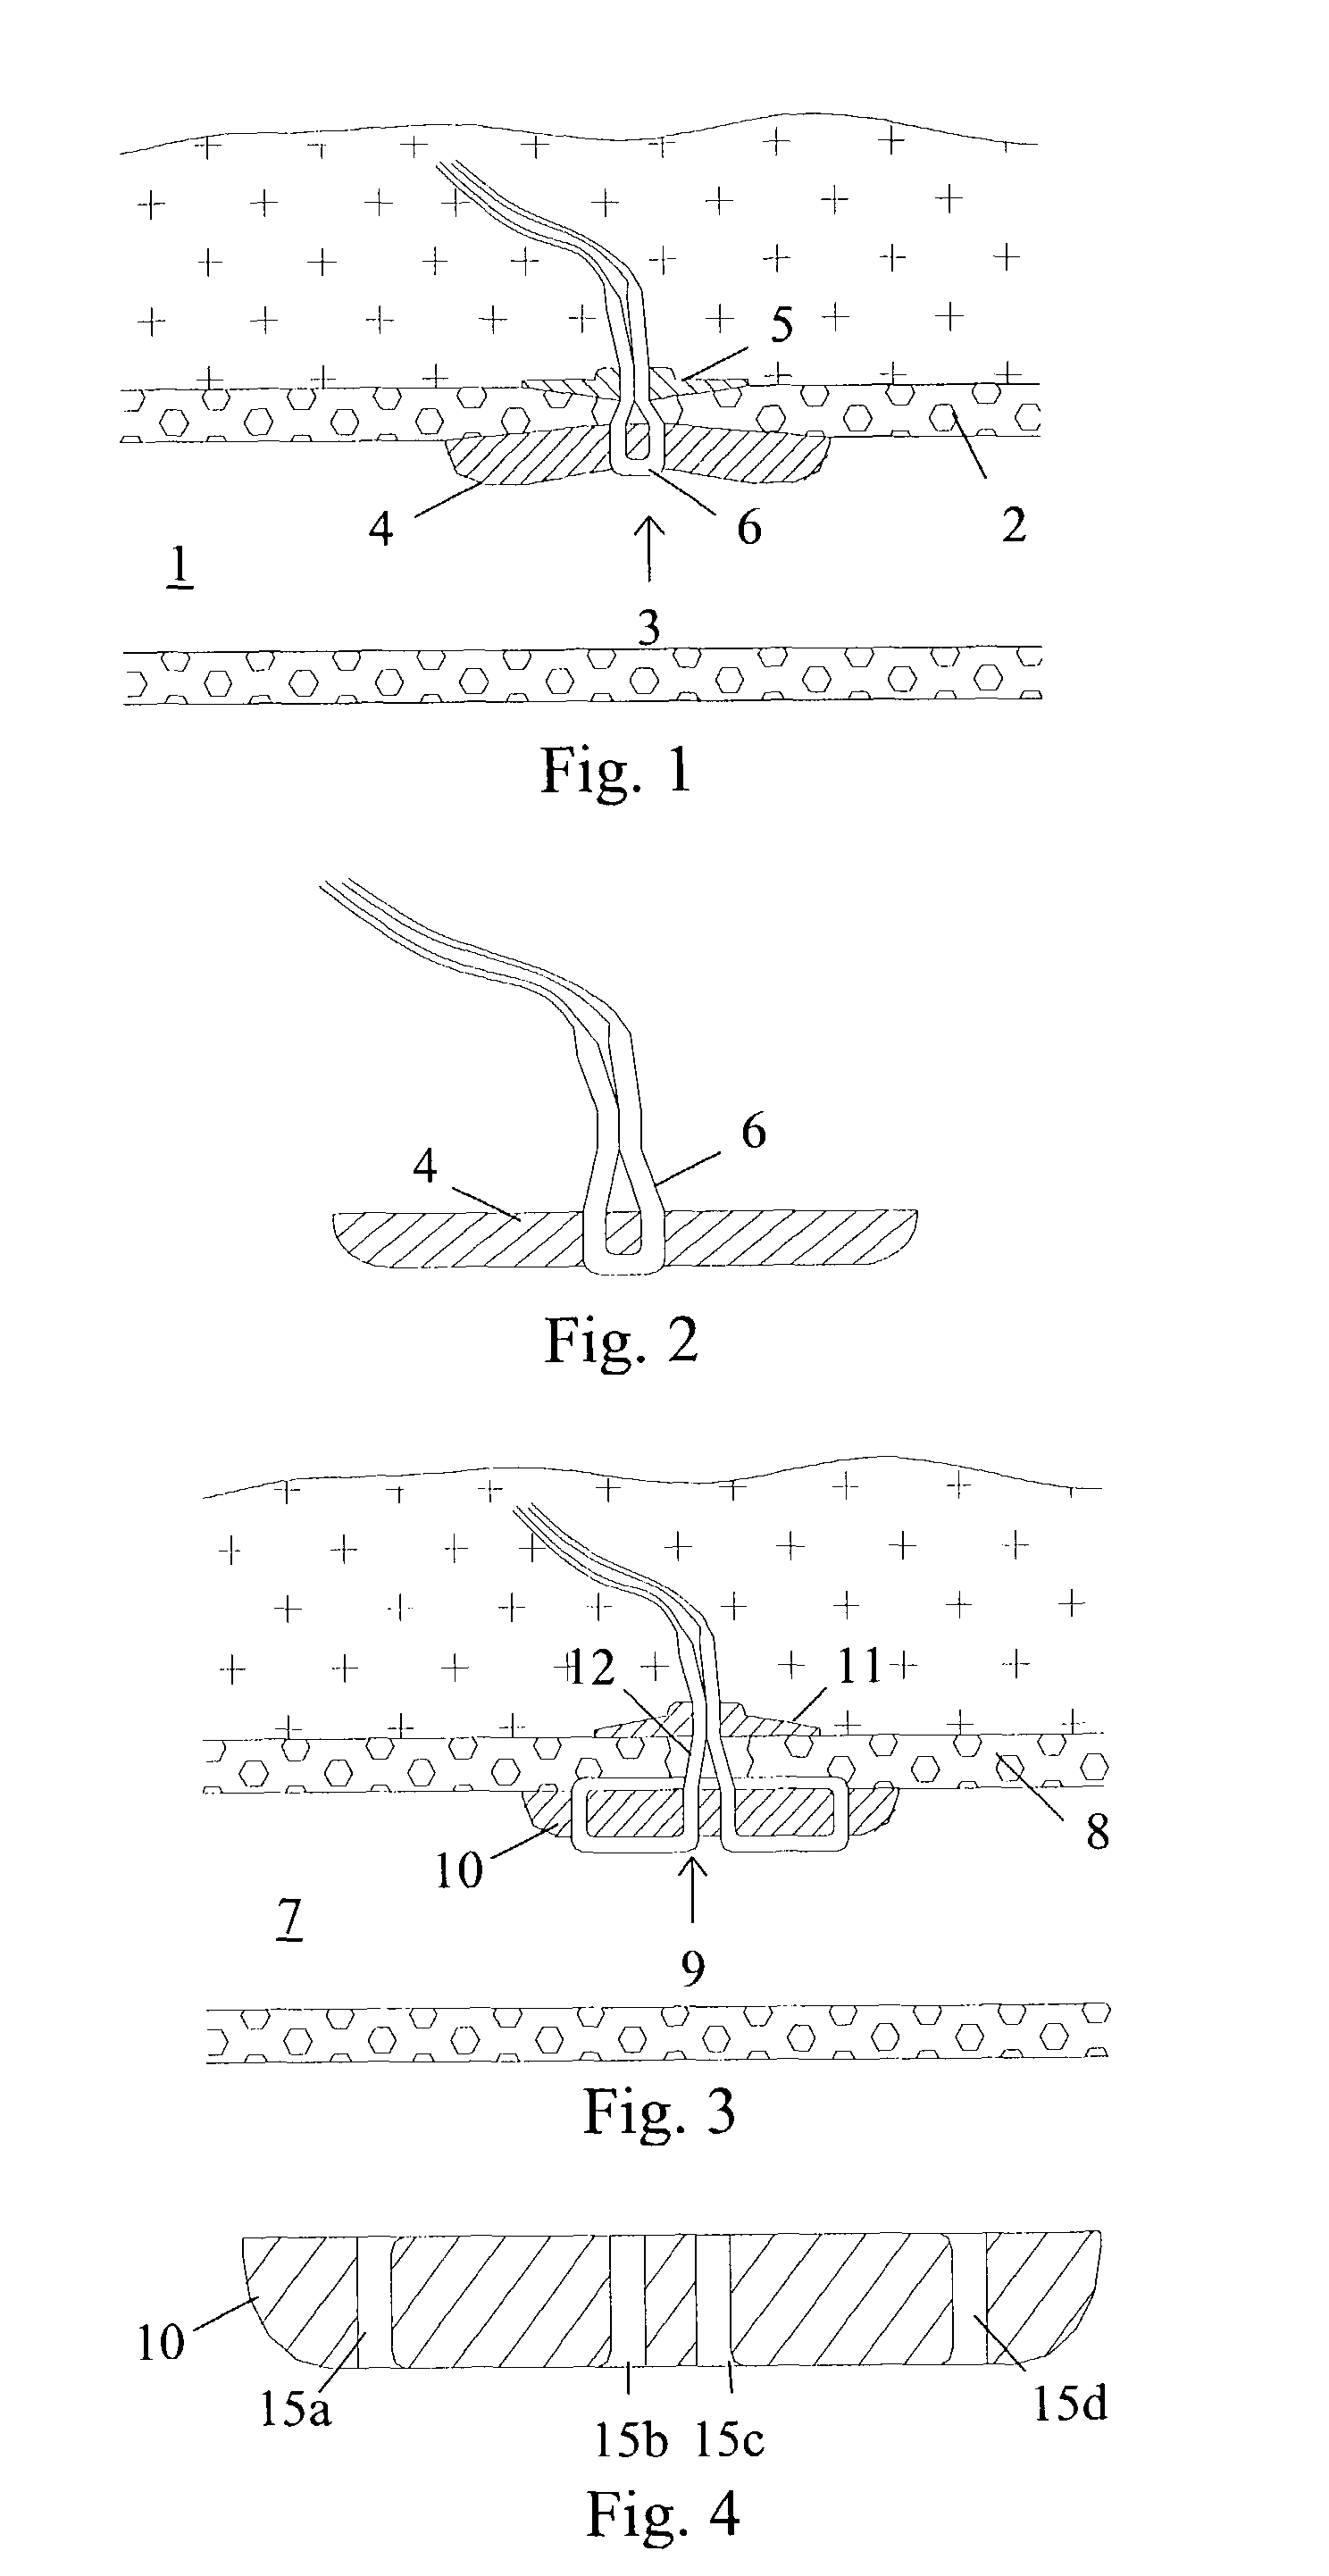 Absorbable medical sealing device with retaining assembly having at least two loops